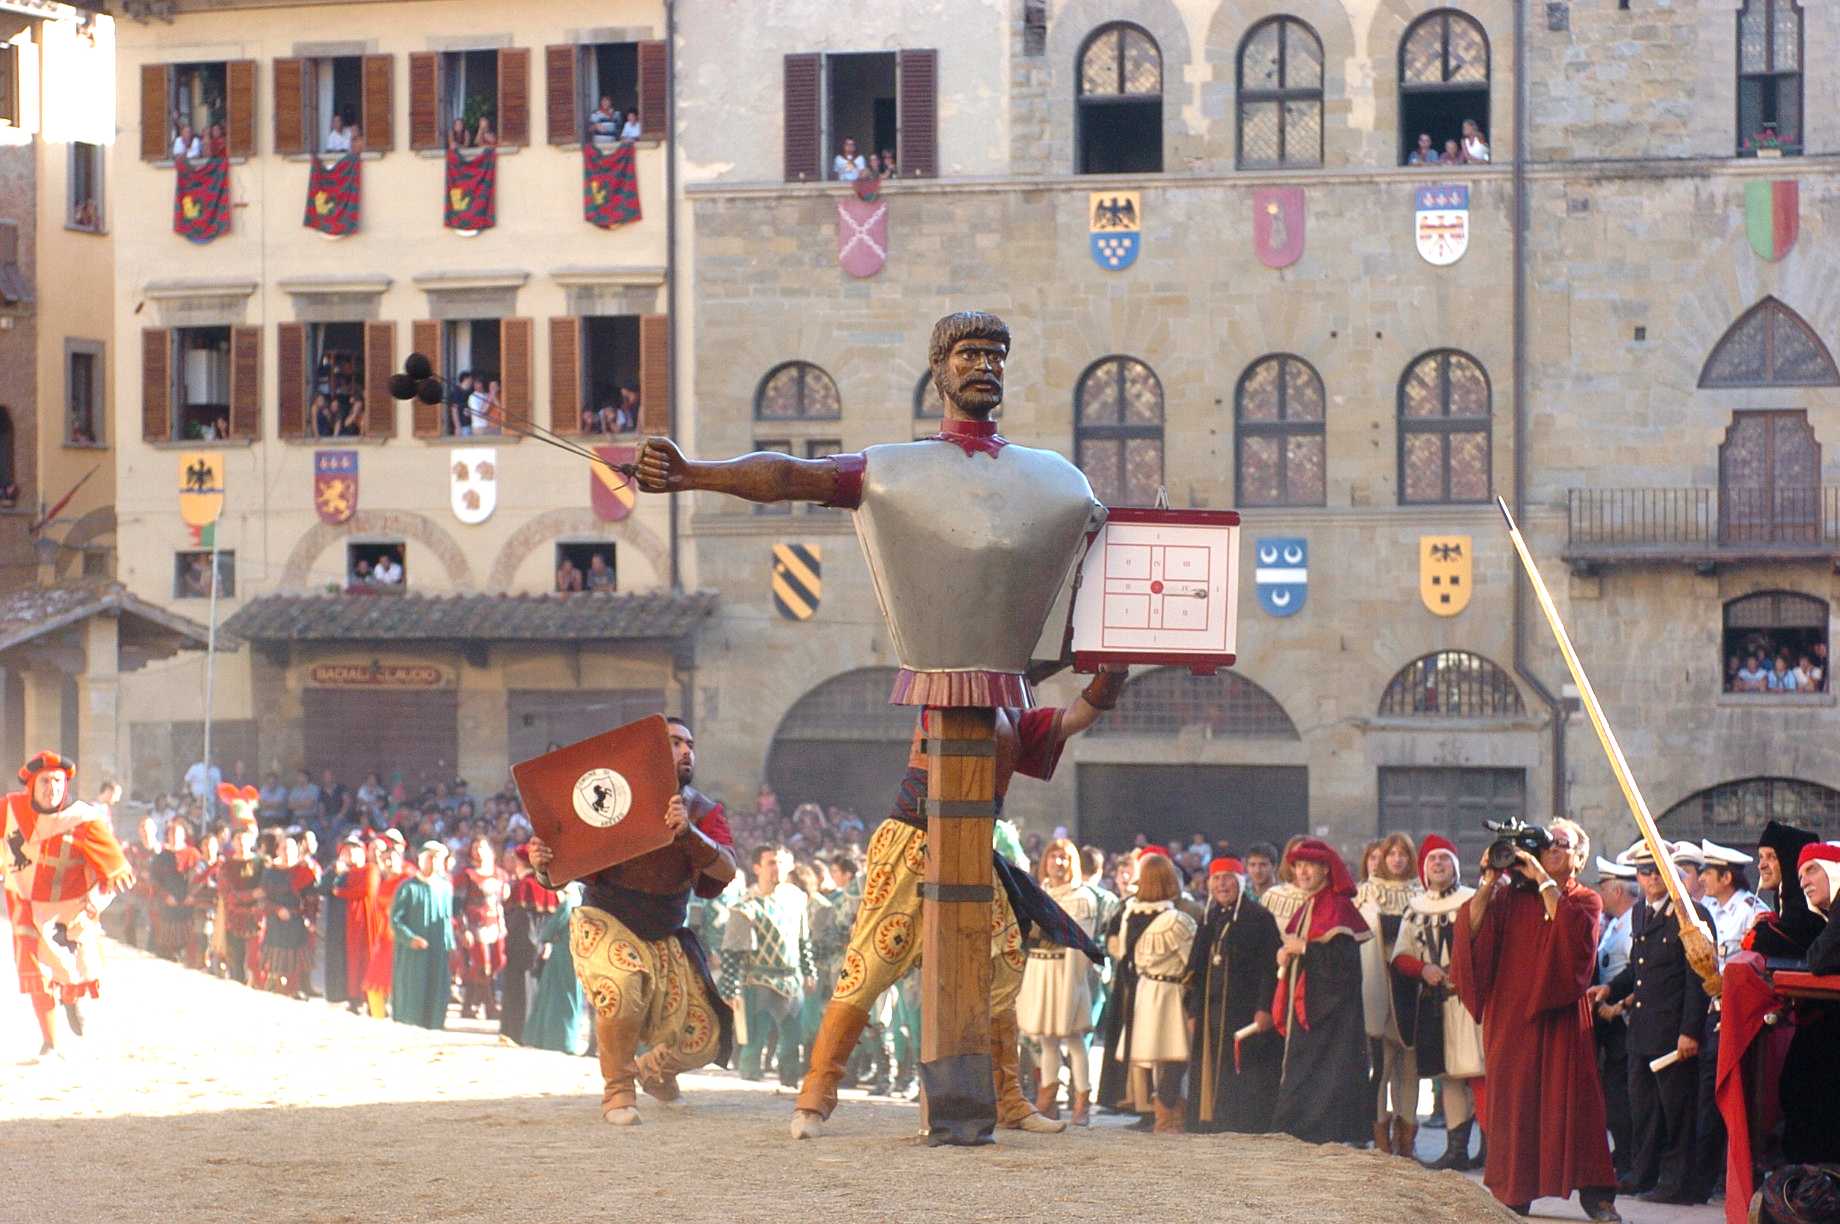 The effigy of the joust